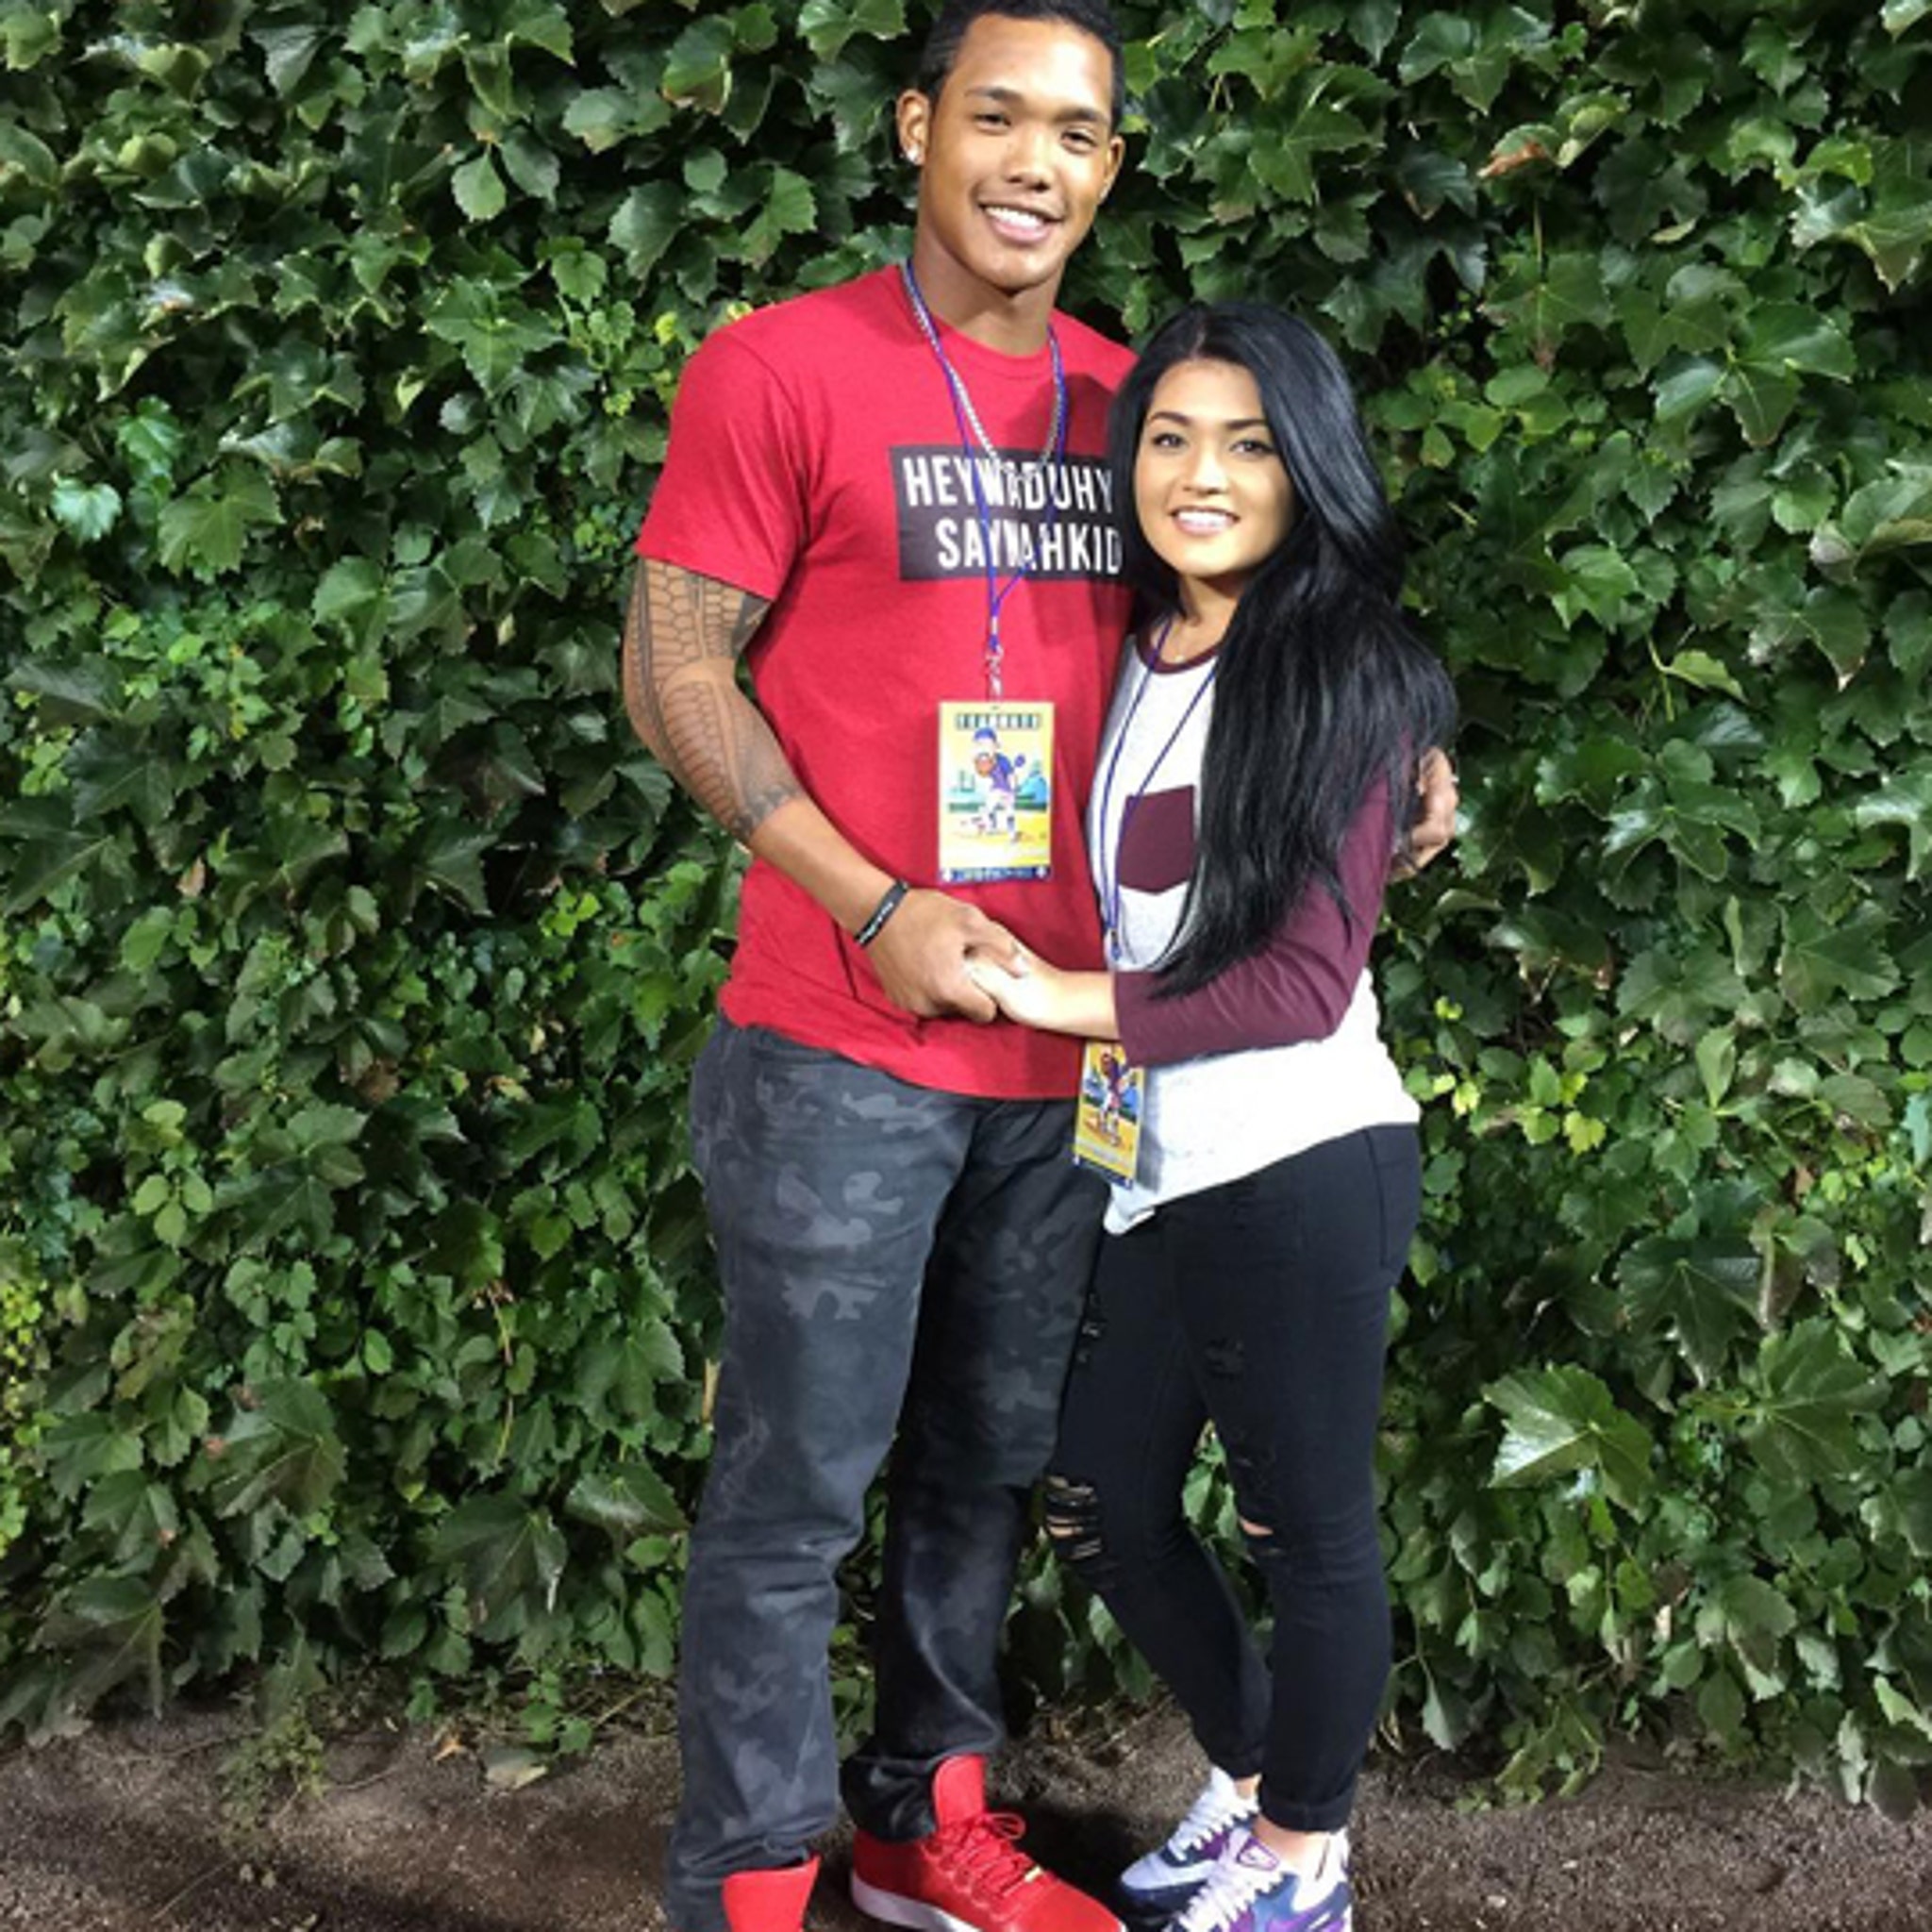 Addison Russell's wife files for divorce amid abuse claims - Sports